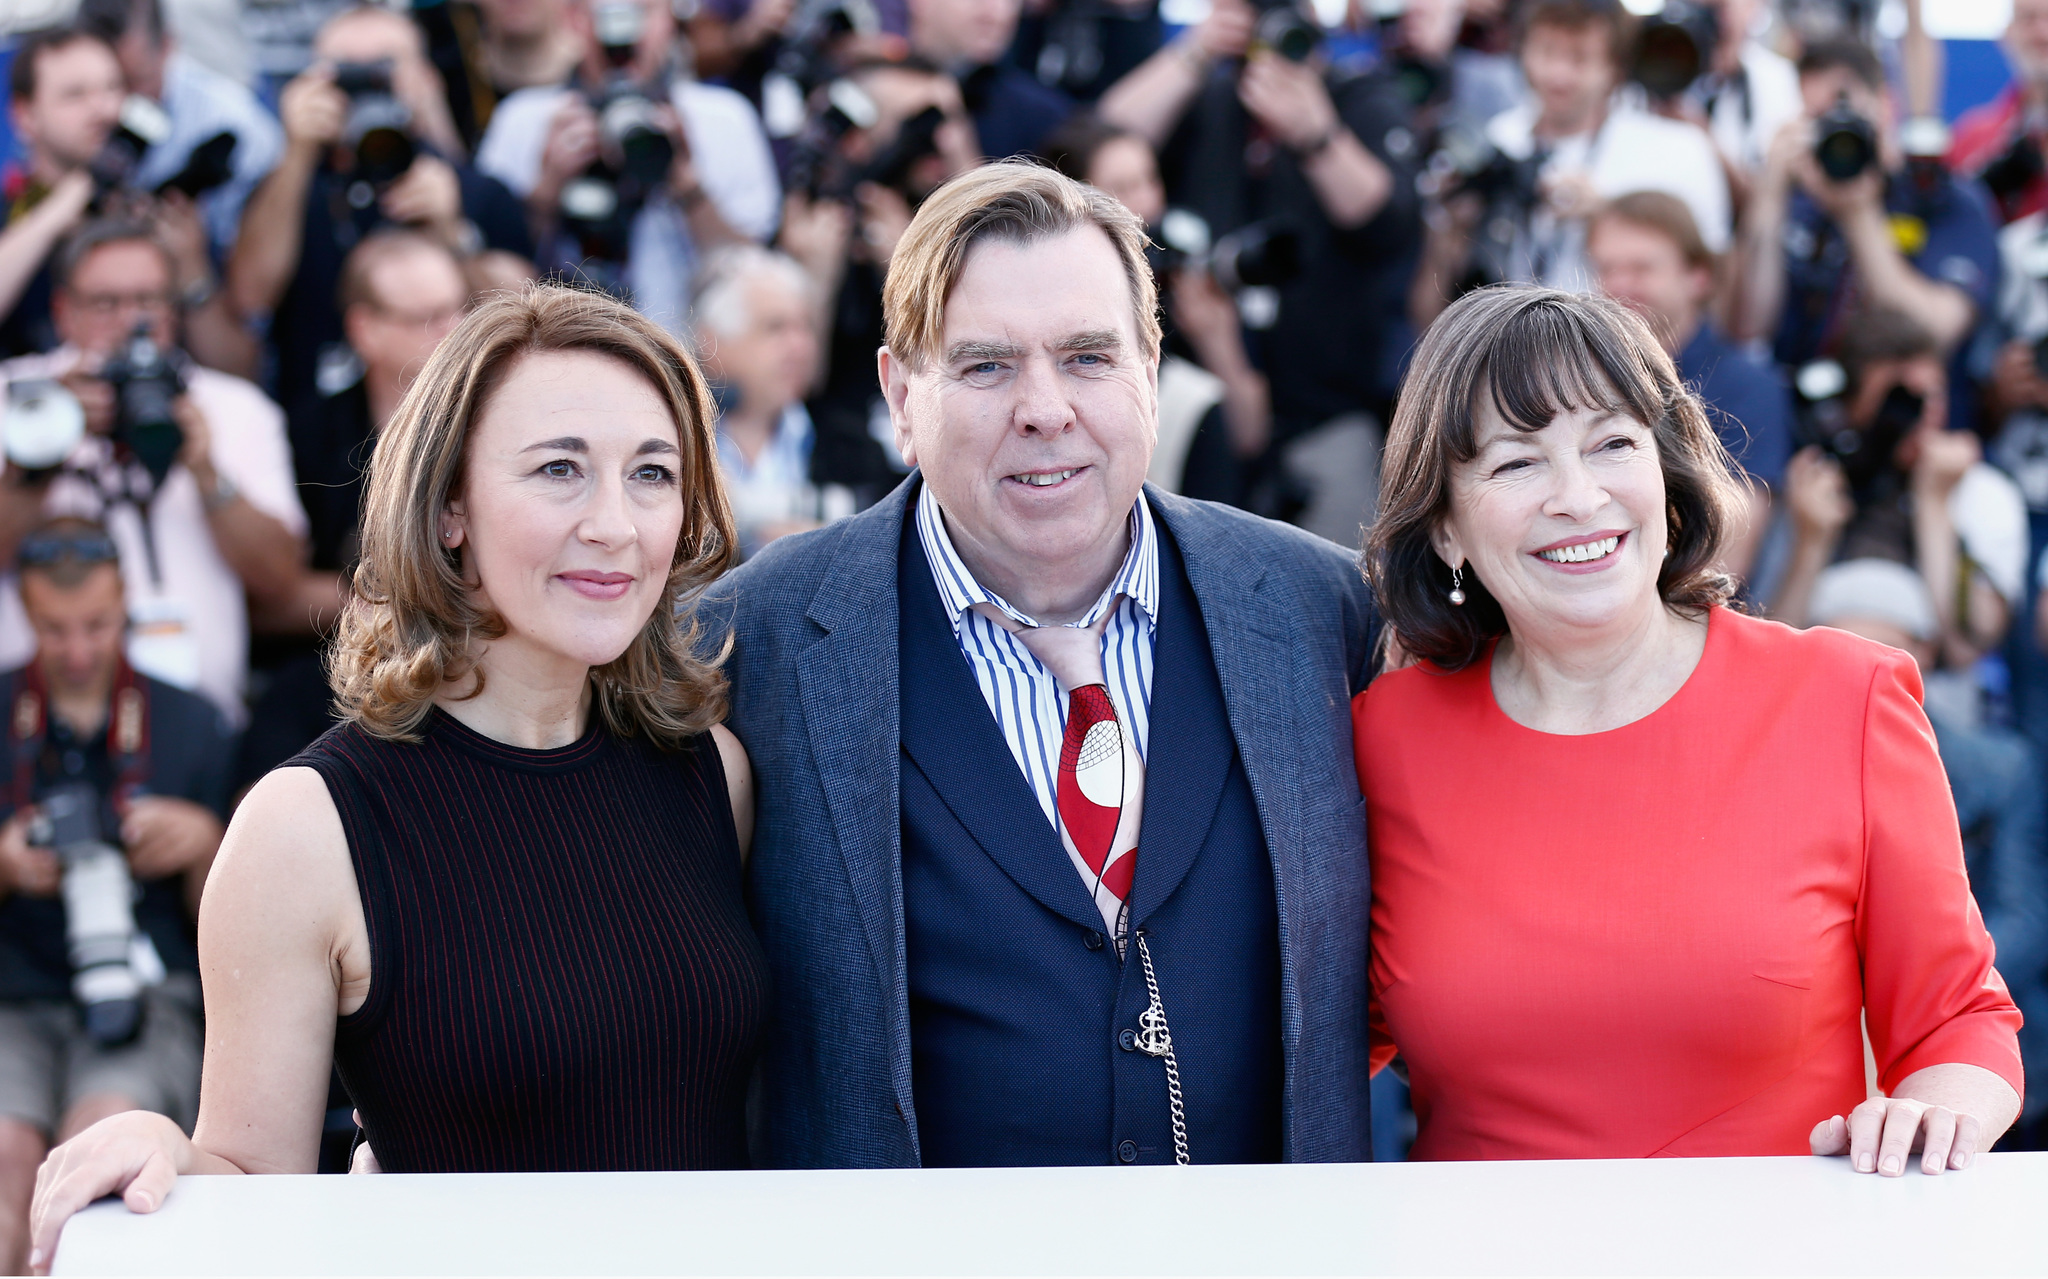 Timothy Spall, Dorothy Atkinson and Marion Bailey at event of Mr. Turner (2014)